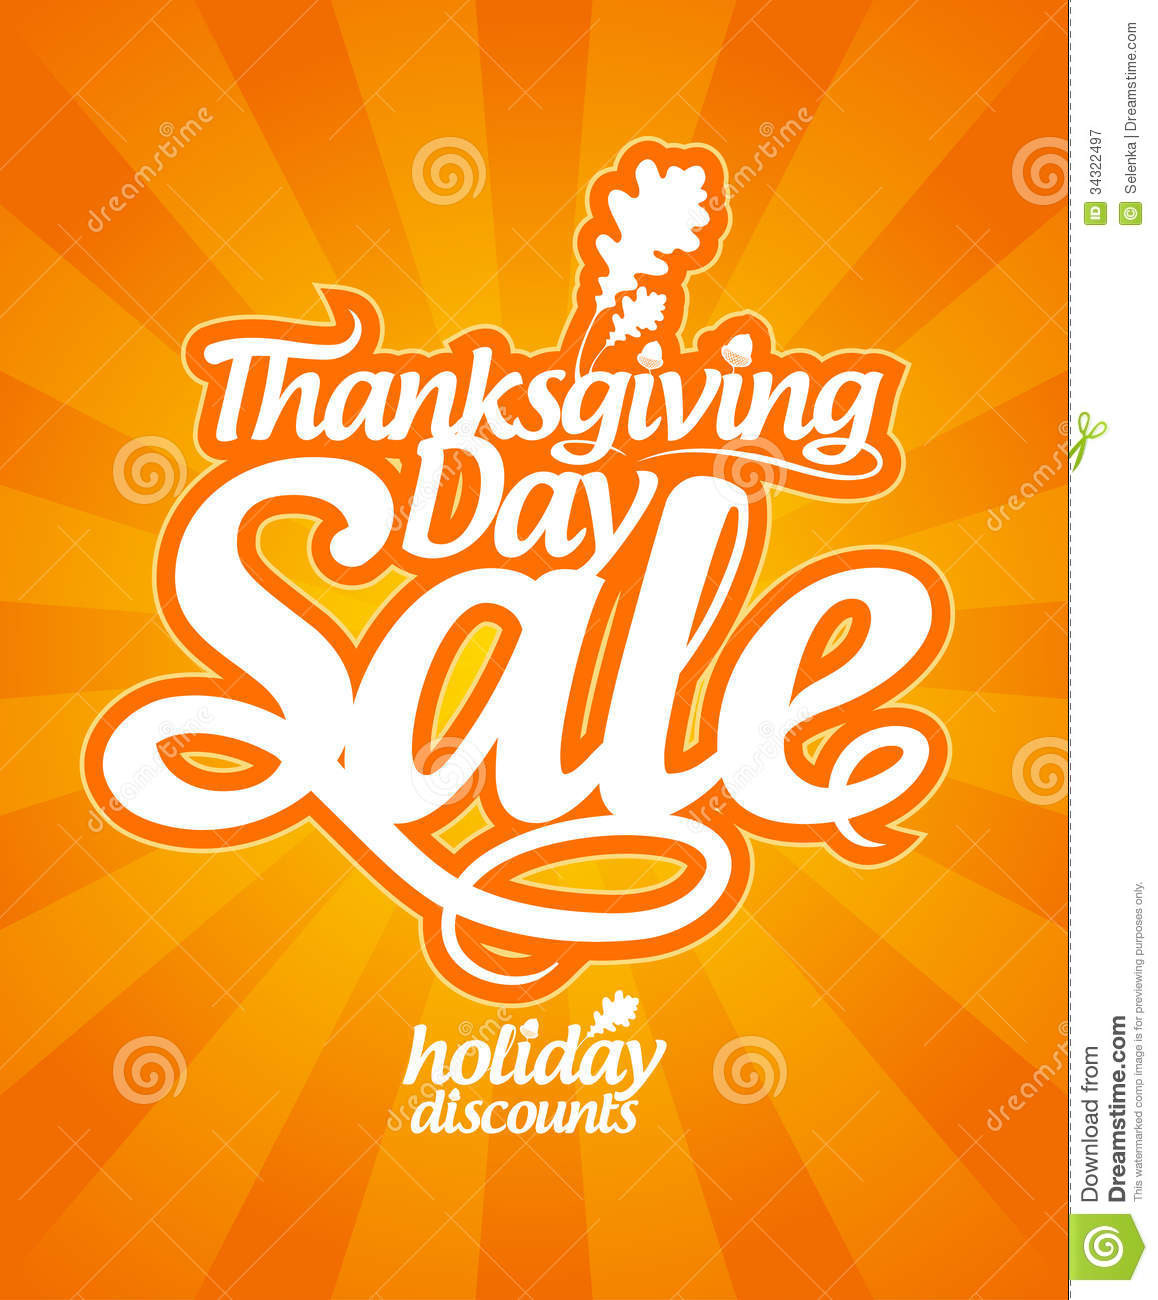 Turkey Sale For Thanksgiving
 Thanksgiving Day Sale Royalty Free Stock graphy